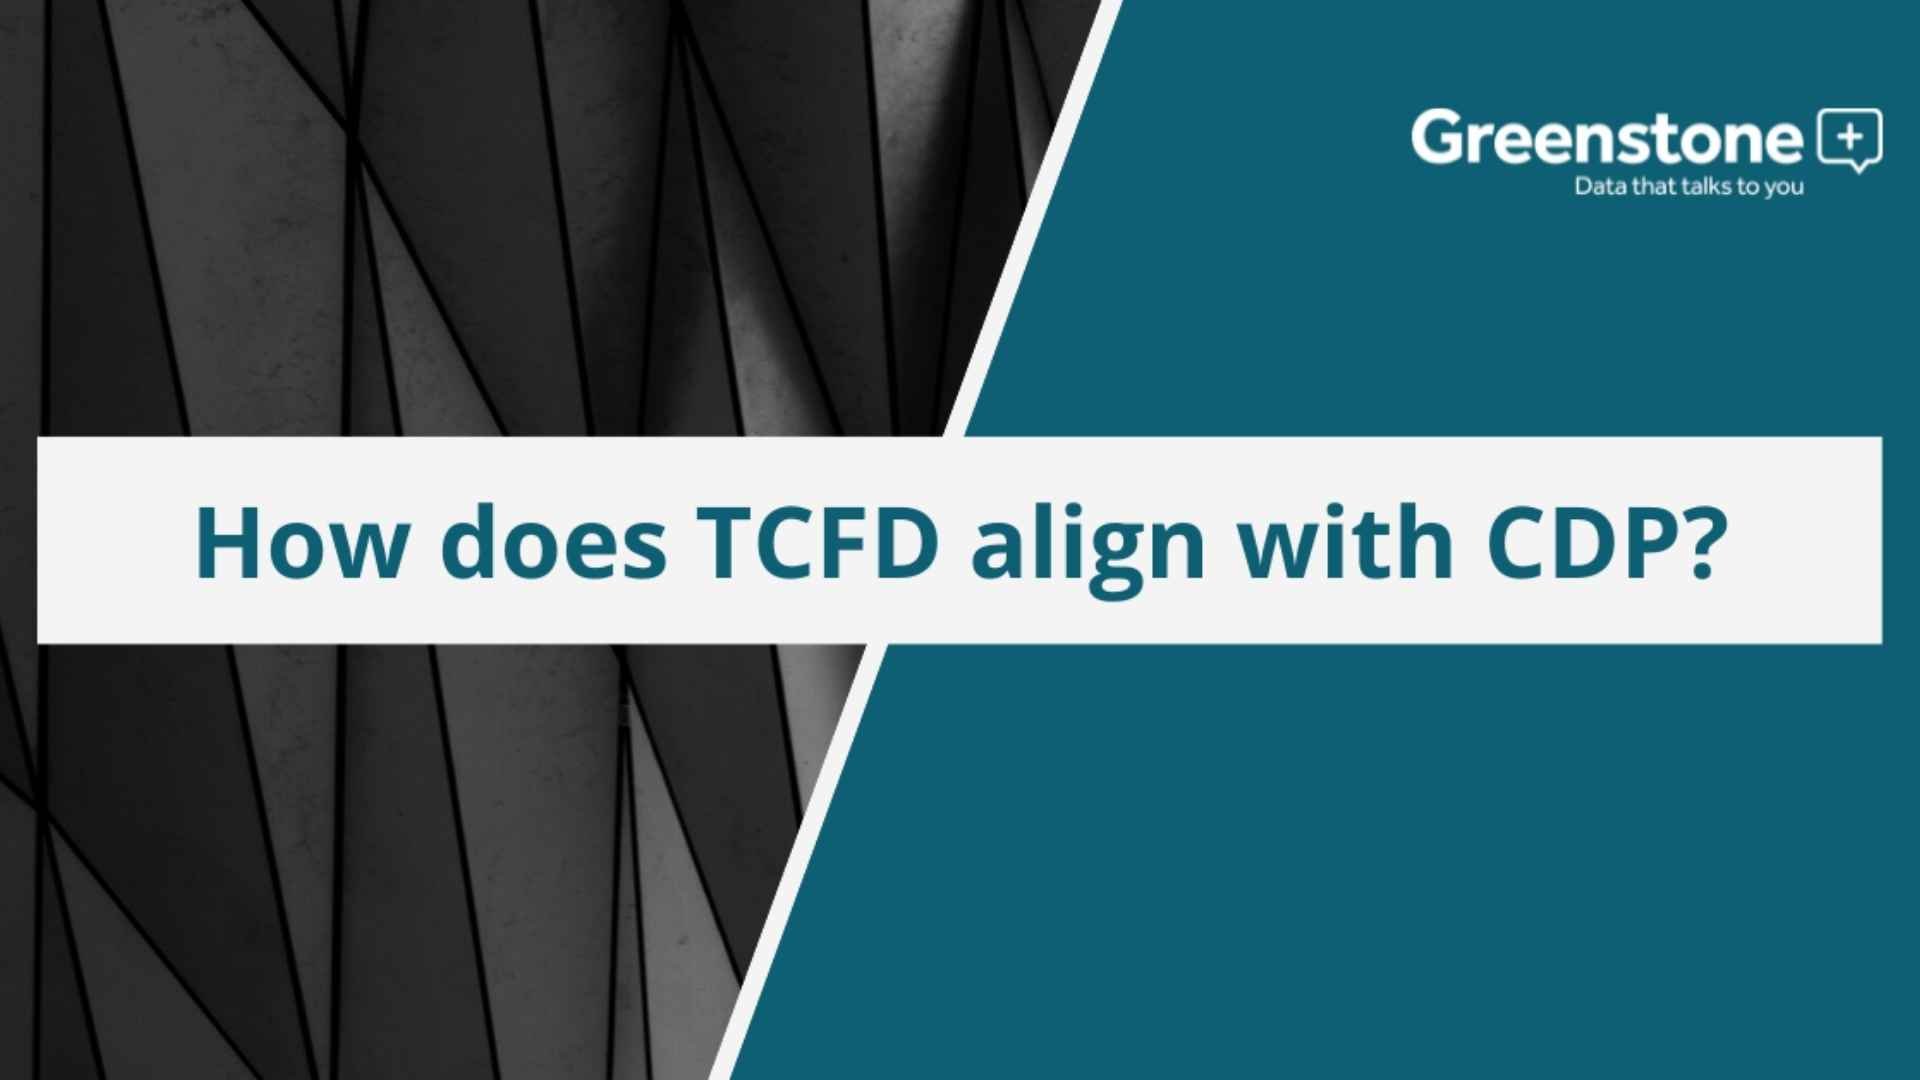 How does TCFD align with CDP?